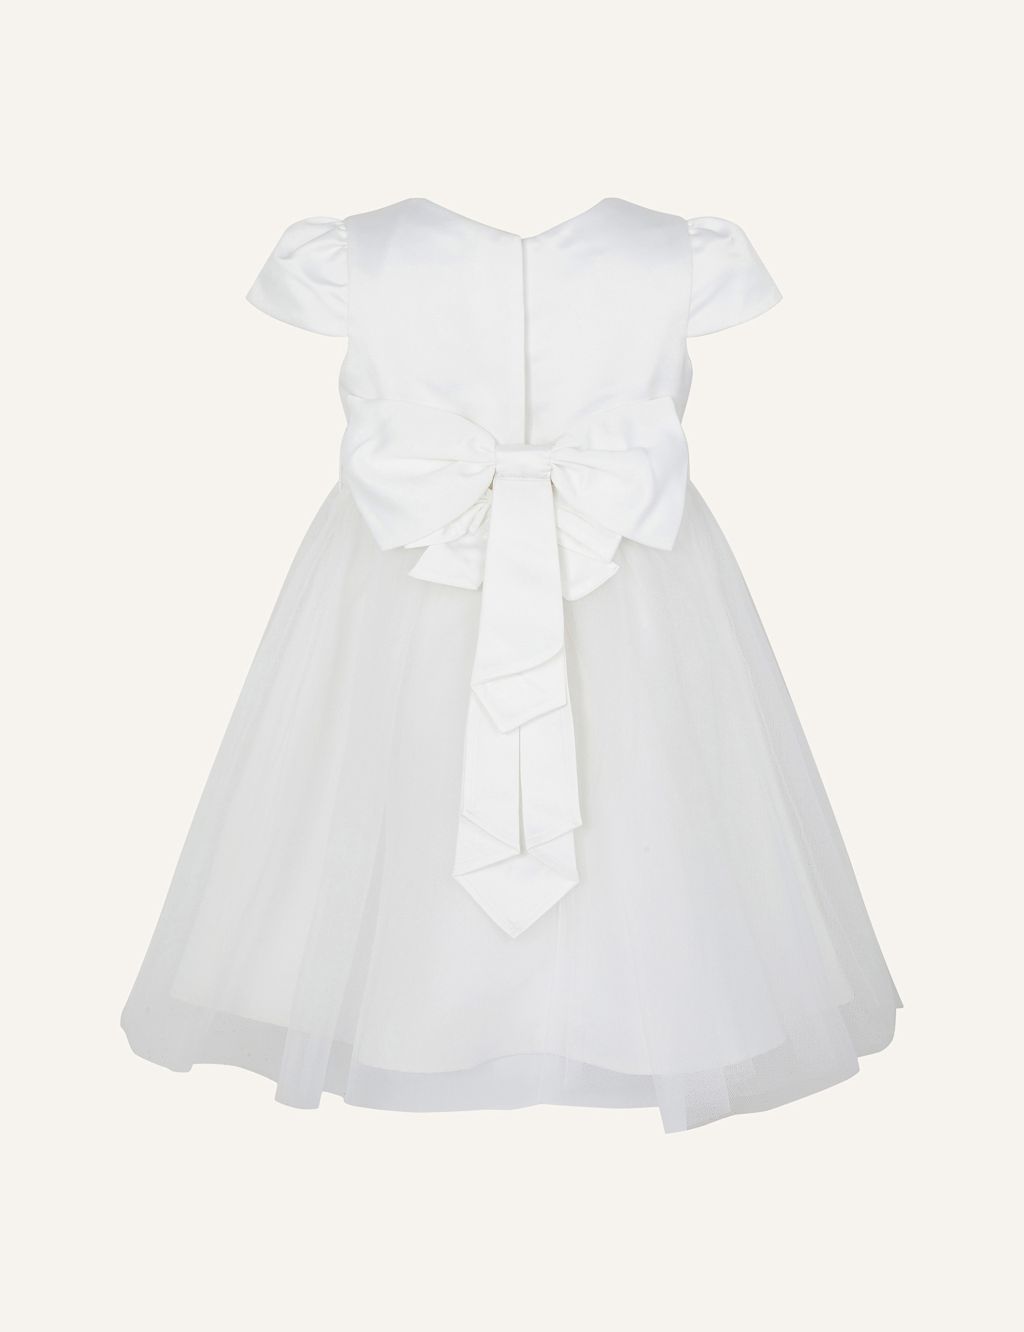 Satin Tulle Occasion Dress (1-3 Yrs) image 2